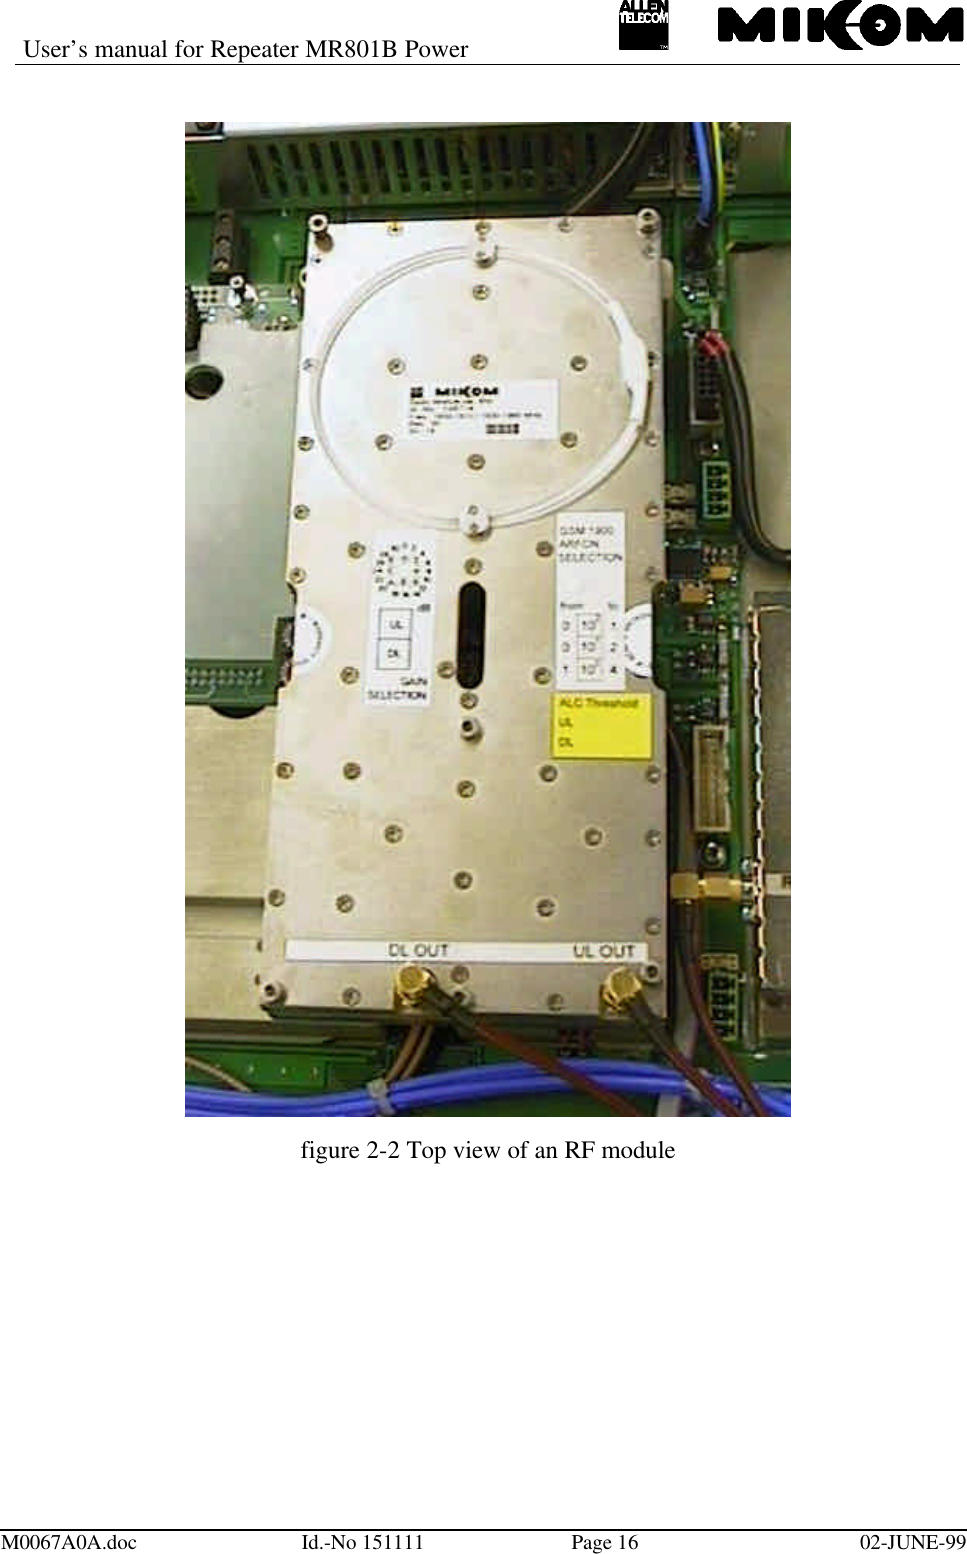 User’s manual for Repeater MR801B PowerM0067A0A.doc Id.-No 151111 Page 16 02-JUNE-99figure 2-2 Top view of an RF module